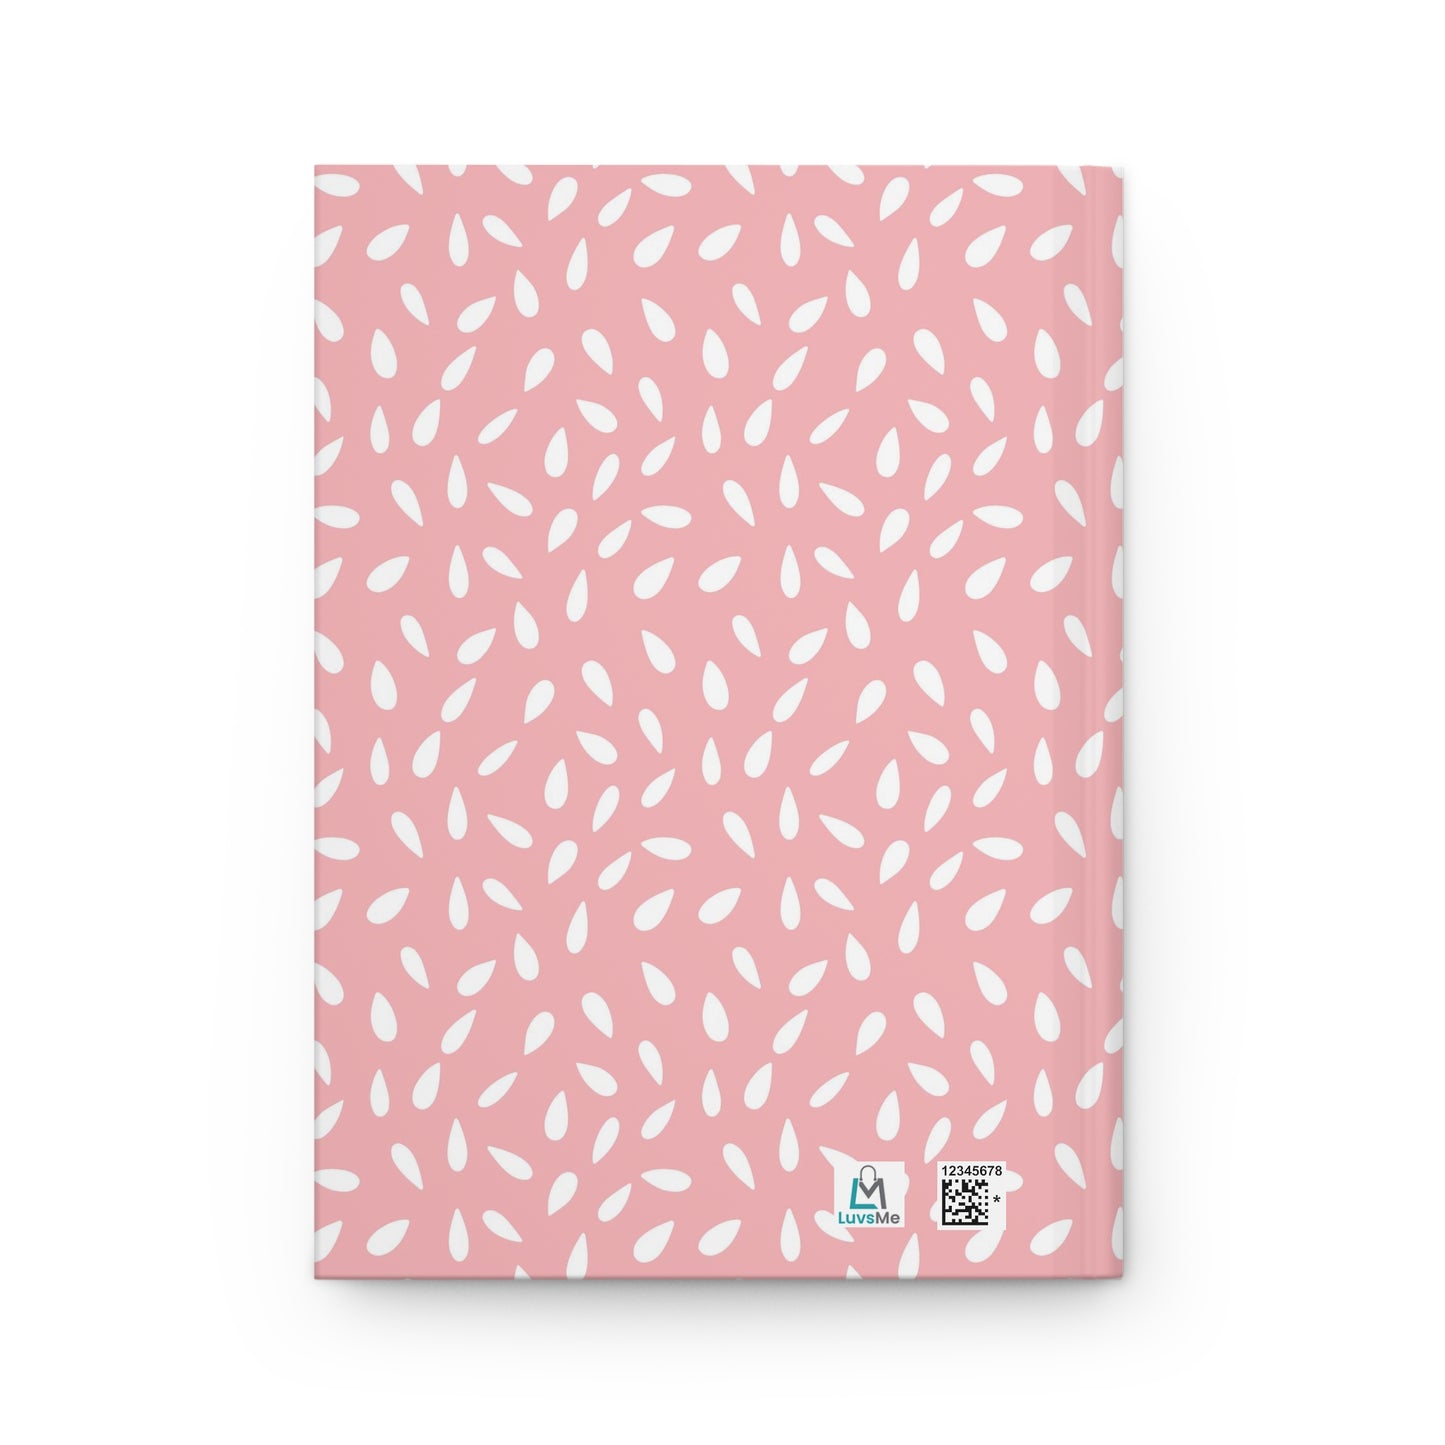 You Are Strong - Pink and White - Hardcover Lined Journal Matte